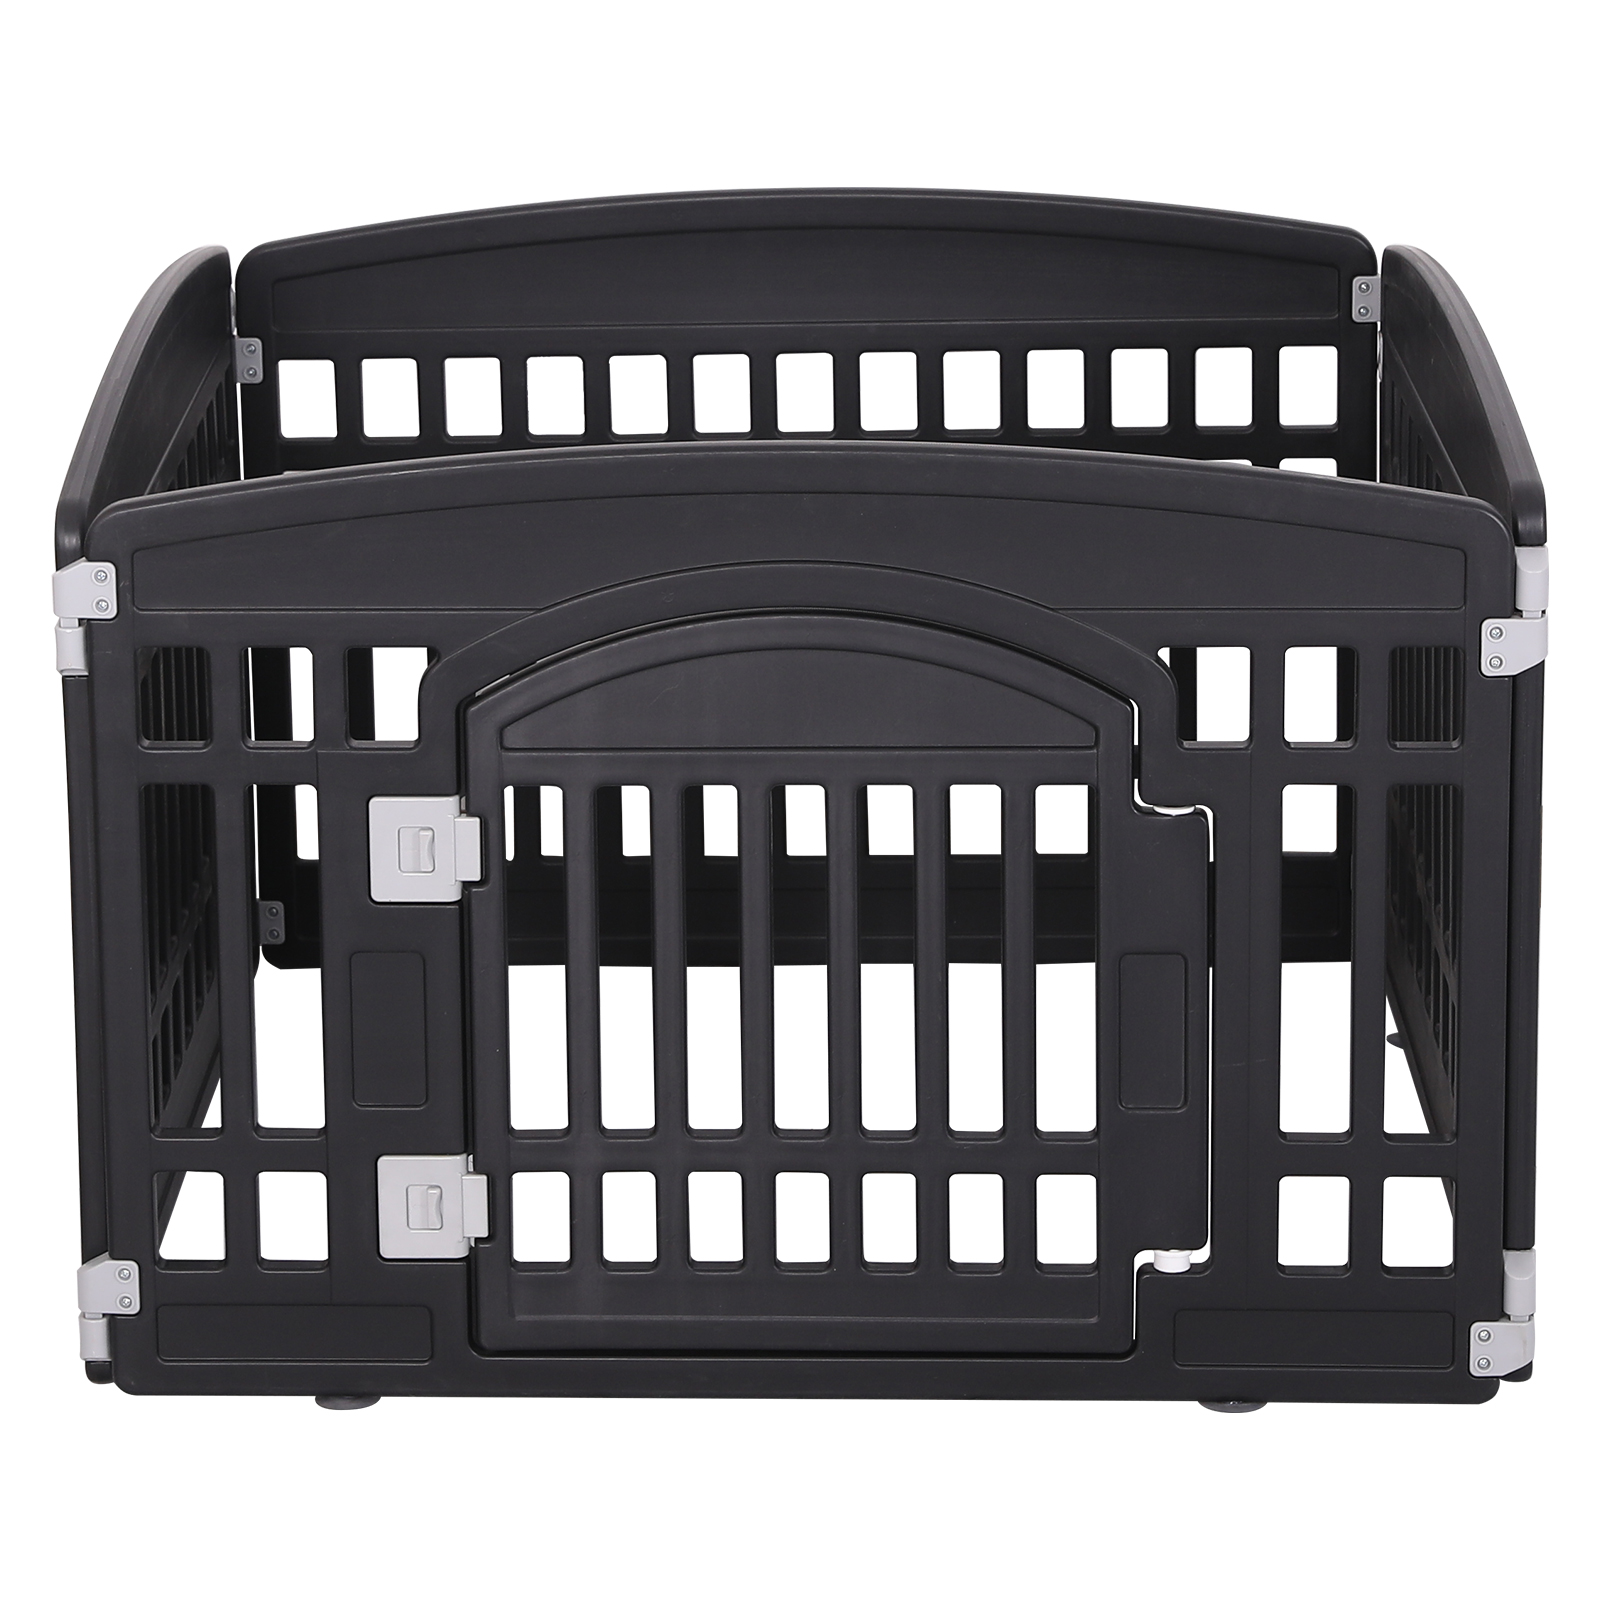 Gupamiga Pet Playpen Foldable Gate for Dogs Heavy Plastic Puppy Exercise Pen with Door Portable Indoor Outdoor Small Pets Fence Puppies Folding Cage 4 Panels Medium Animals House Supplies (33.5x33.5 inches)